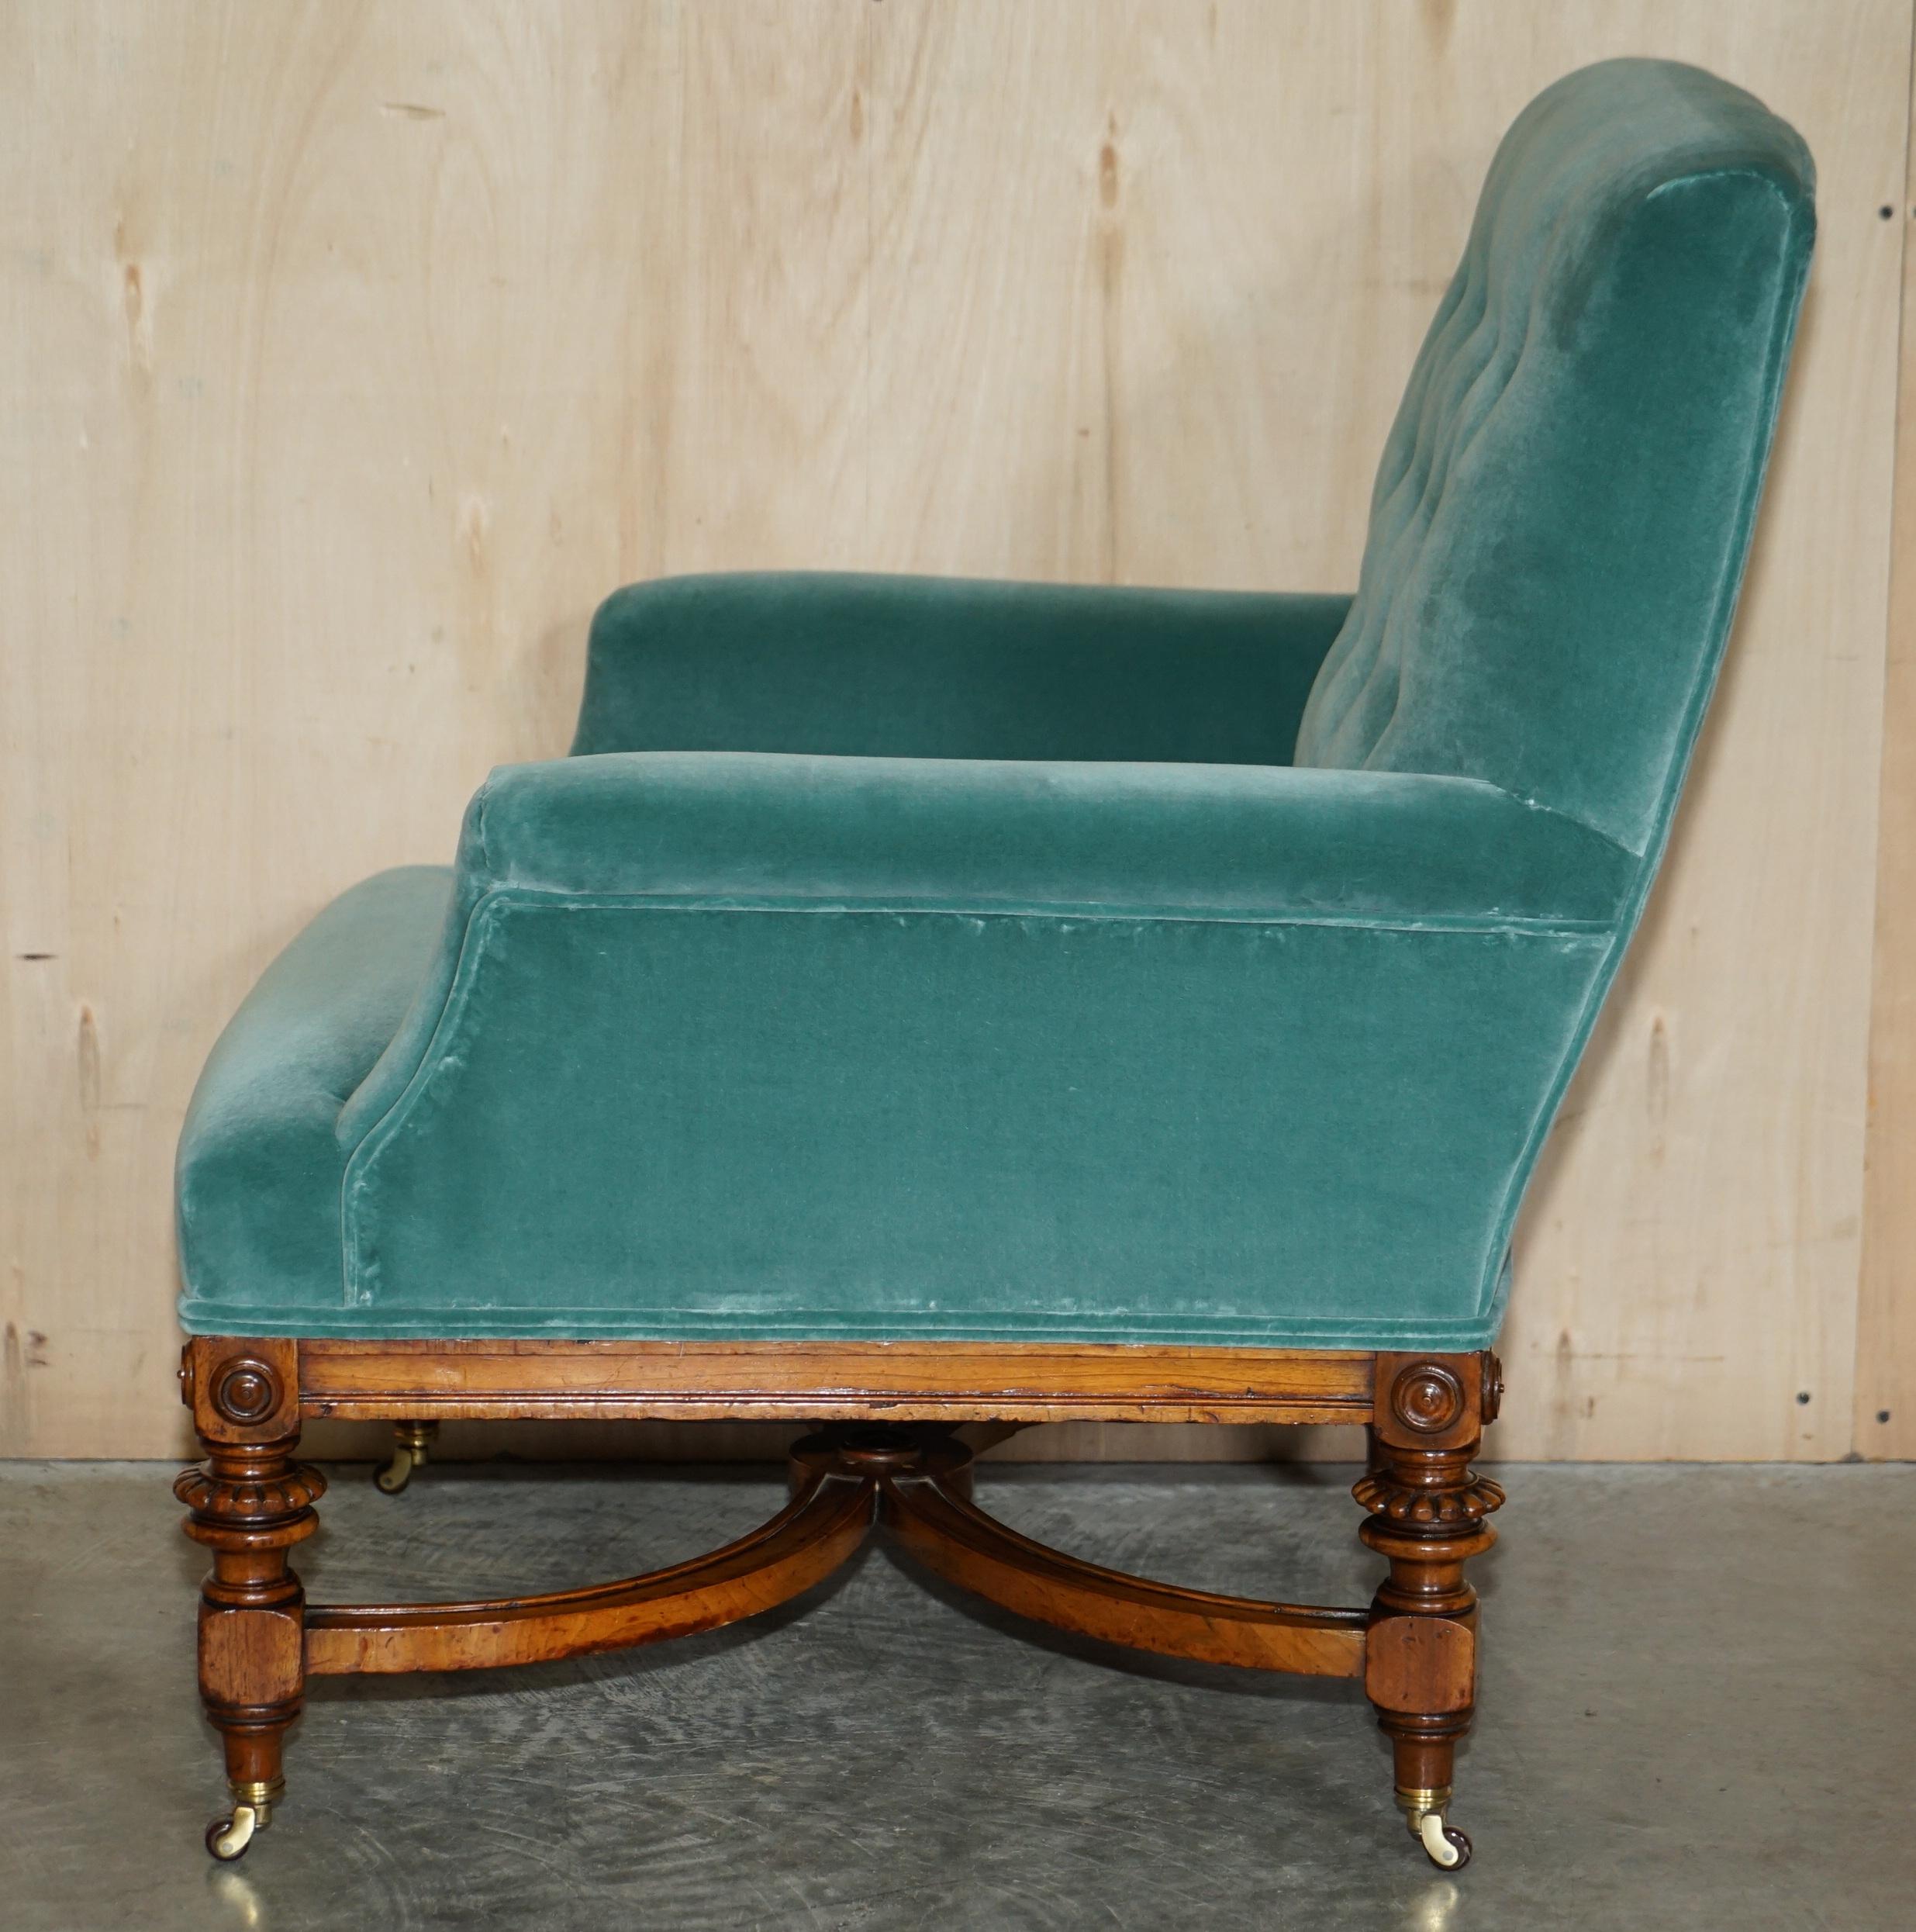 FULLY RESTORED ANTIQUE VICTORIAN LIBRARY ARMCHAiR MULBERRY VELVET UPHOLSTERY For Sale 12